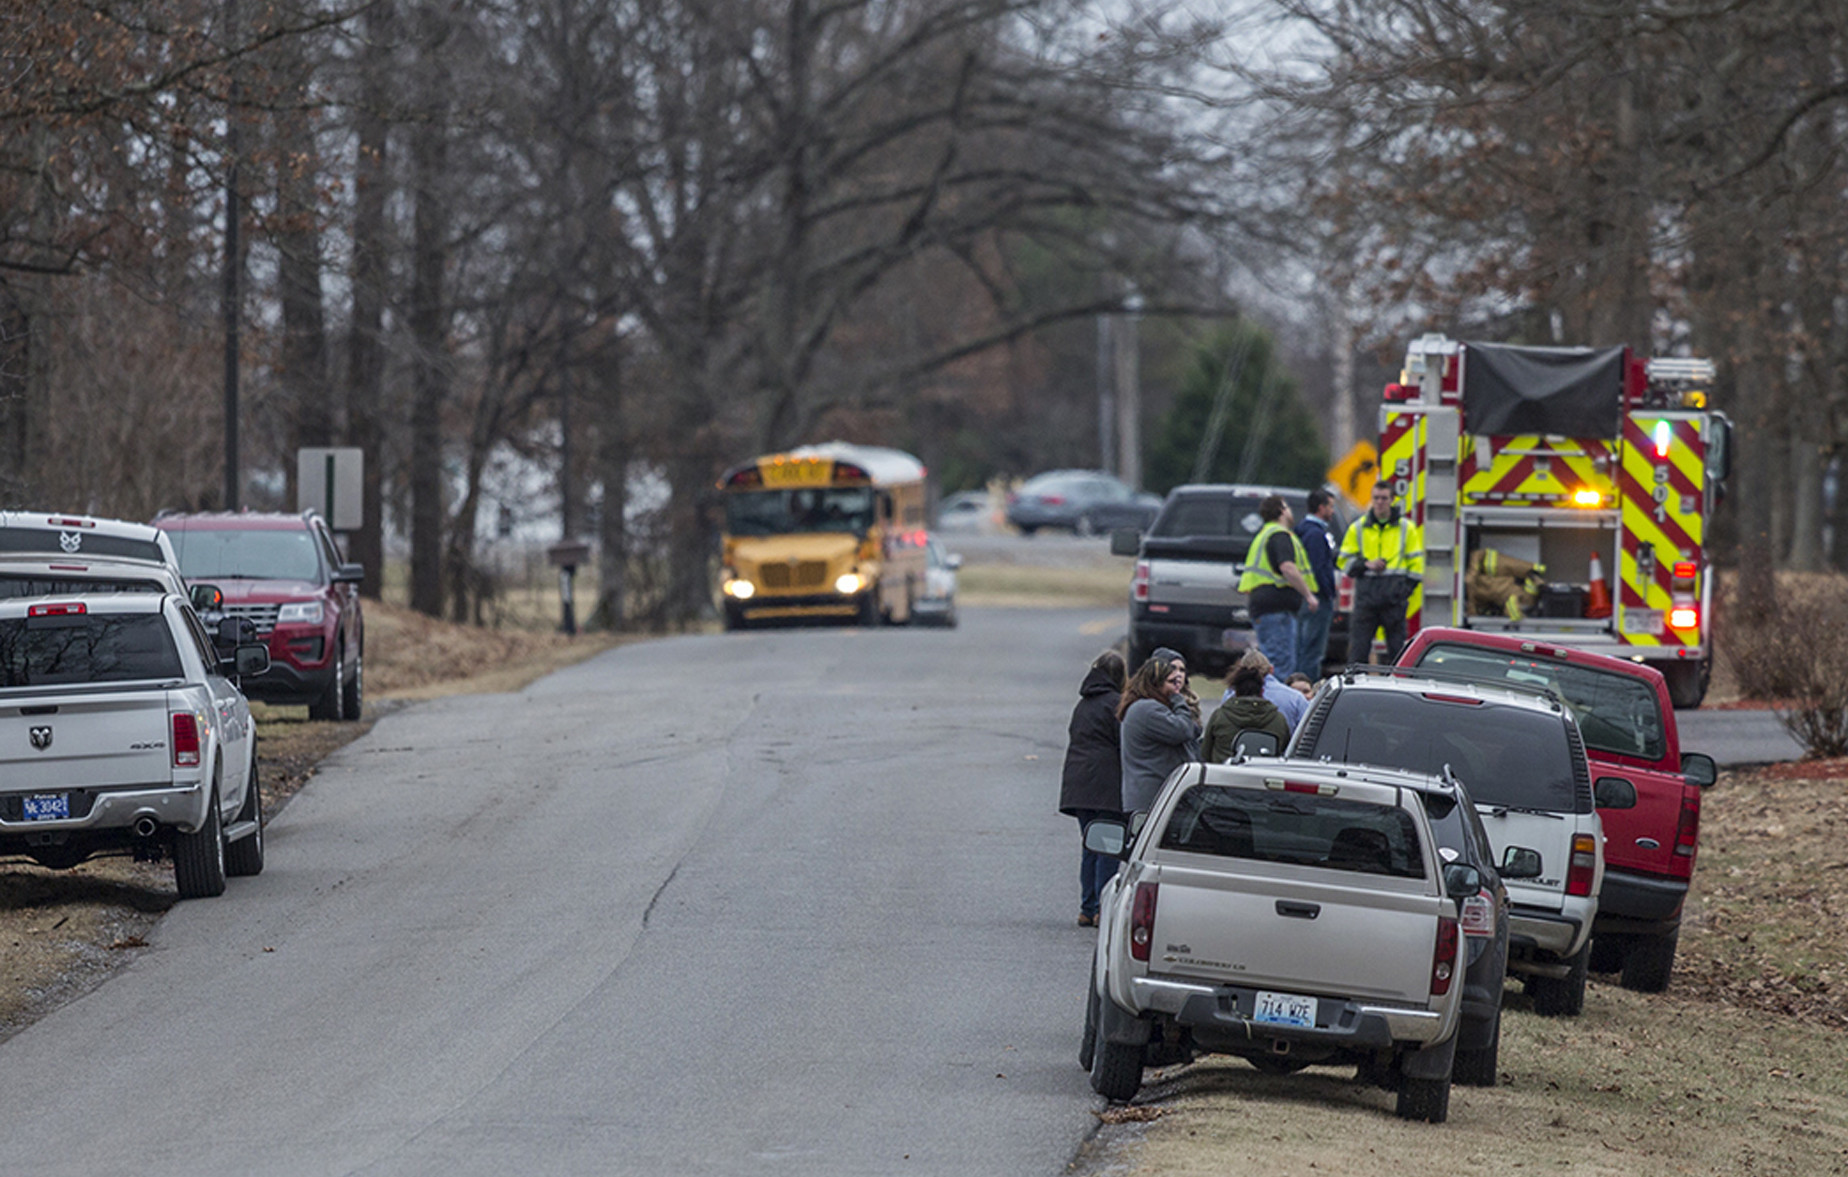 Kentucky School Shooting Leaves At Least Two Dead And 17 Others Injured - Yeshiva ...